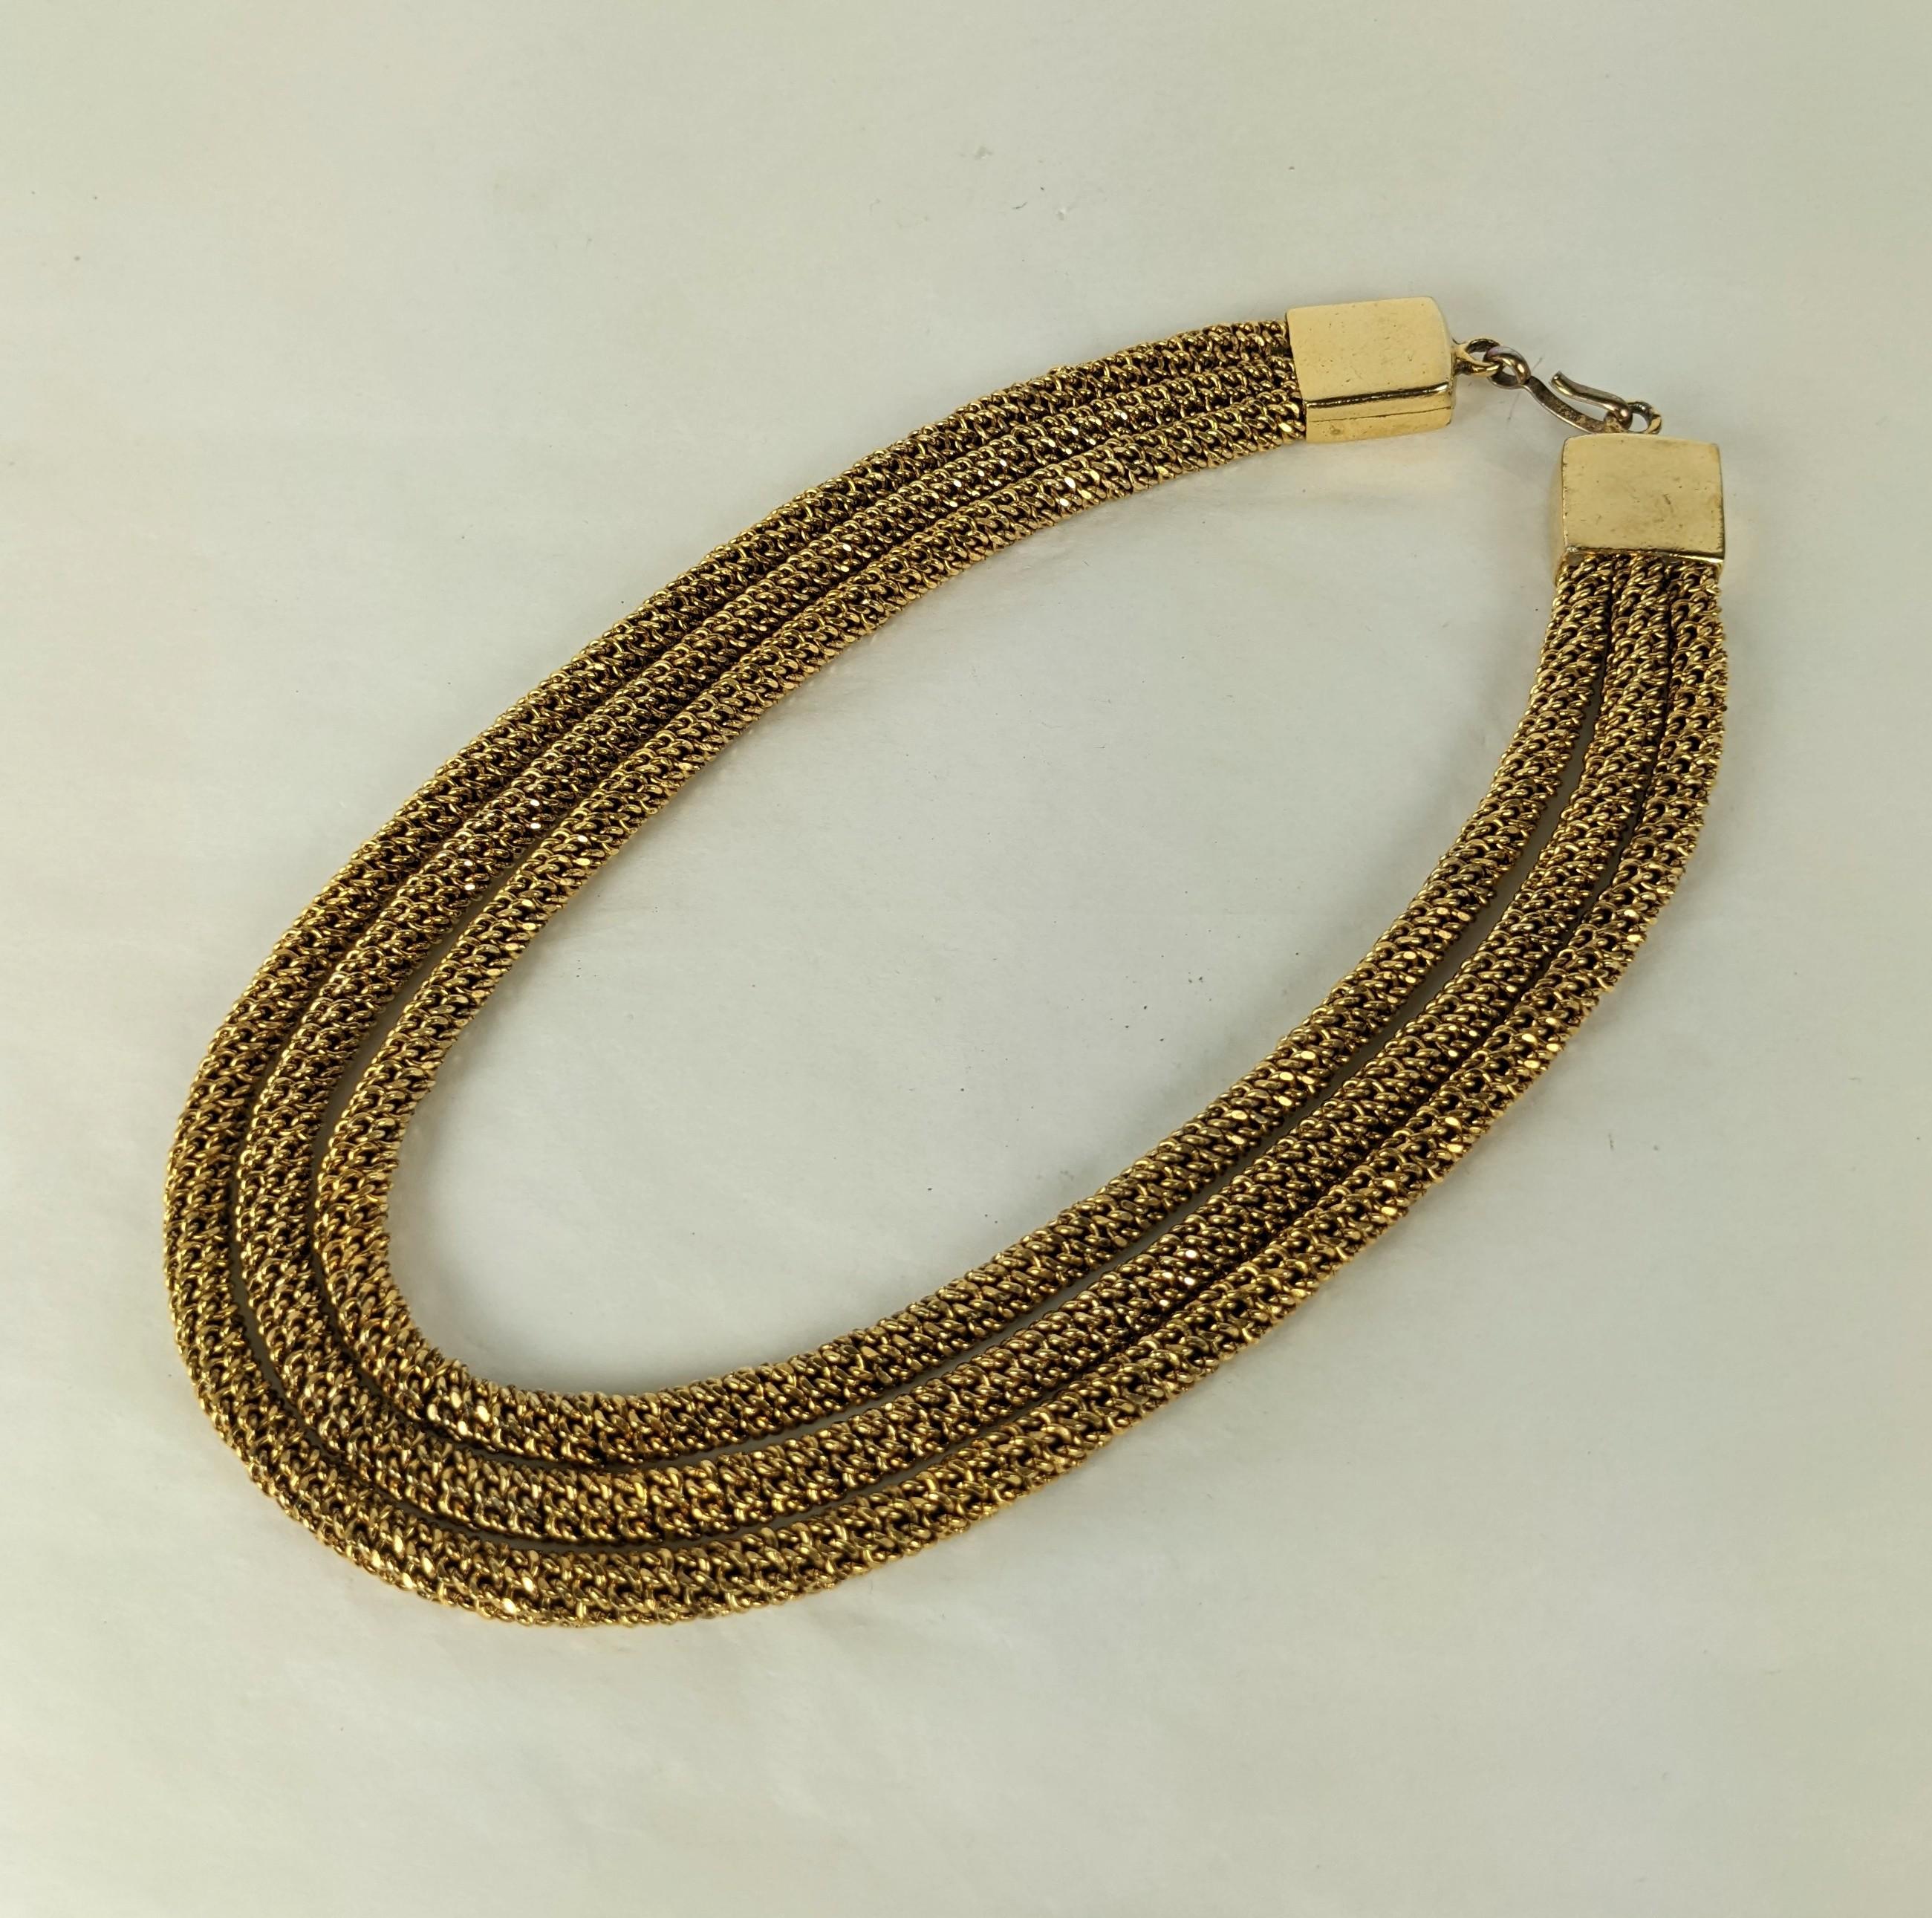 Unusual French Chain Multistrand Necklace composed of 3 